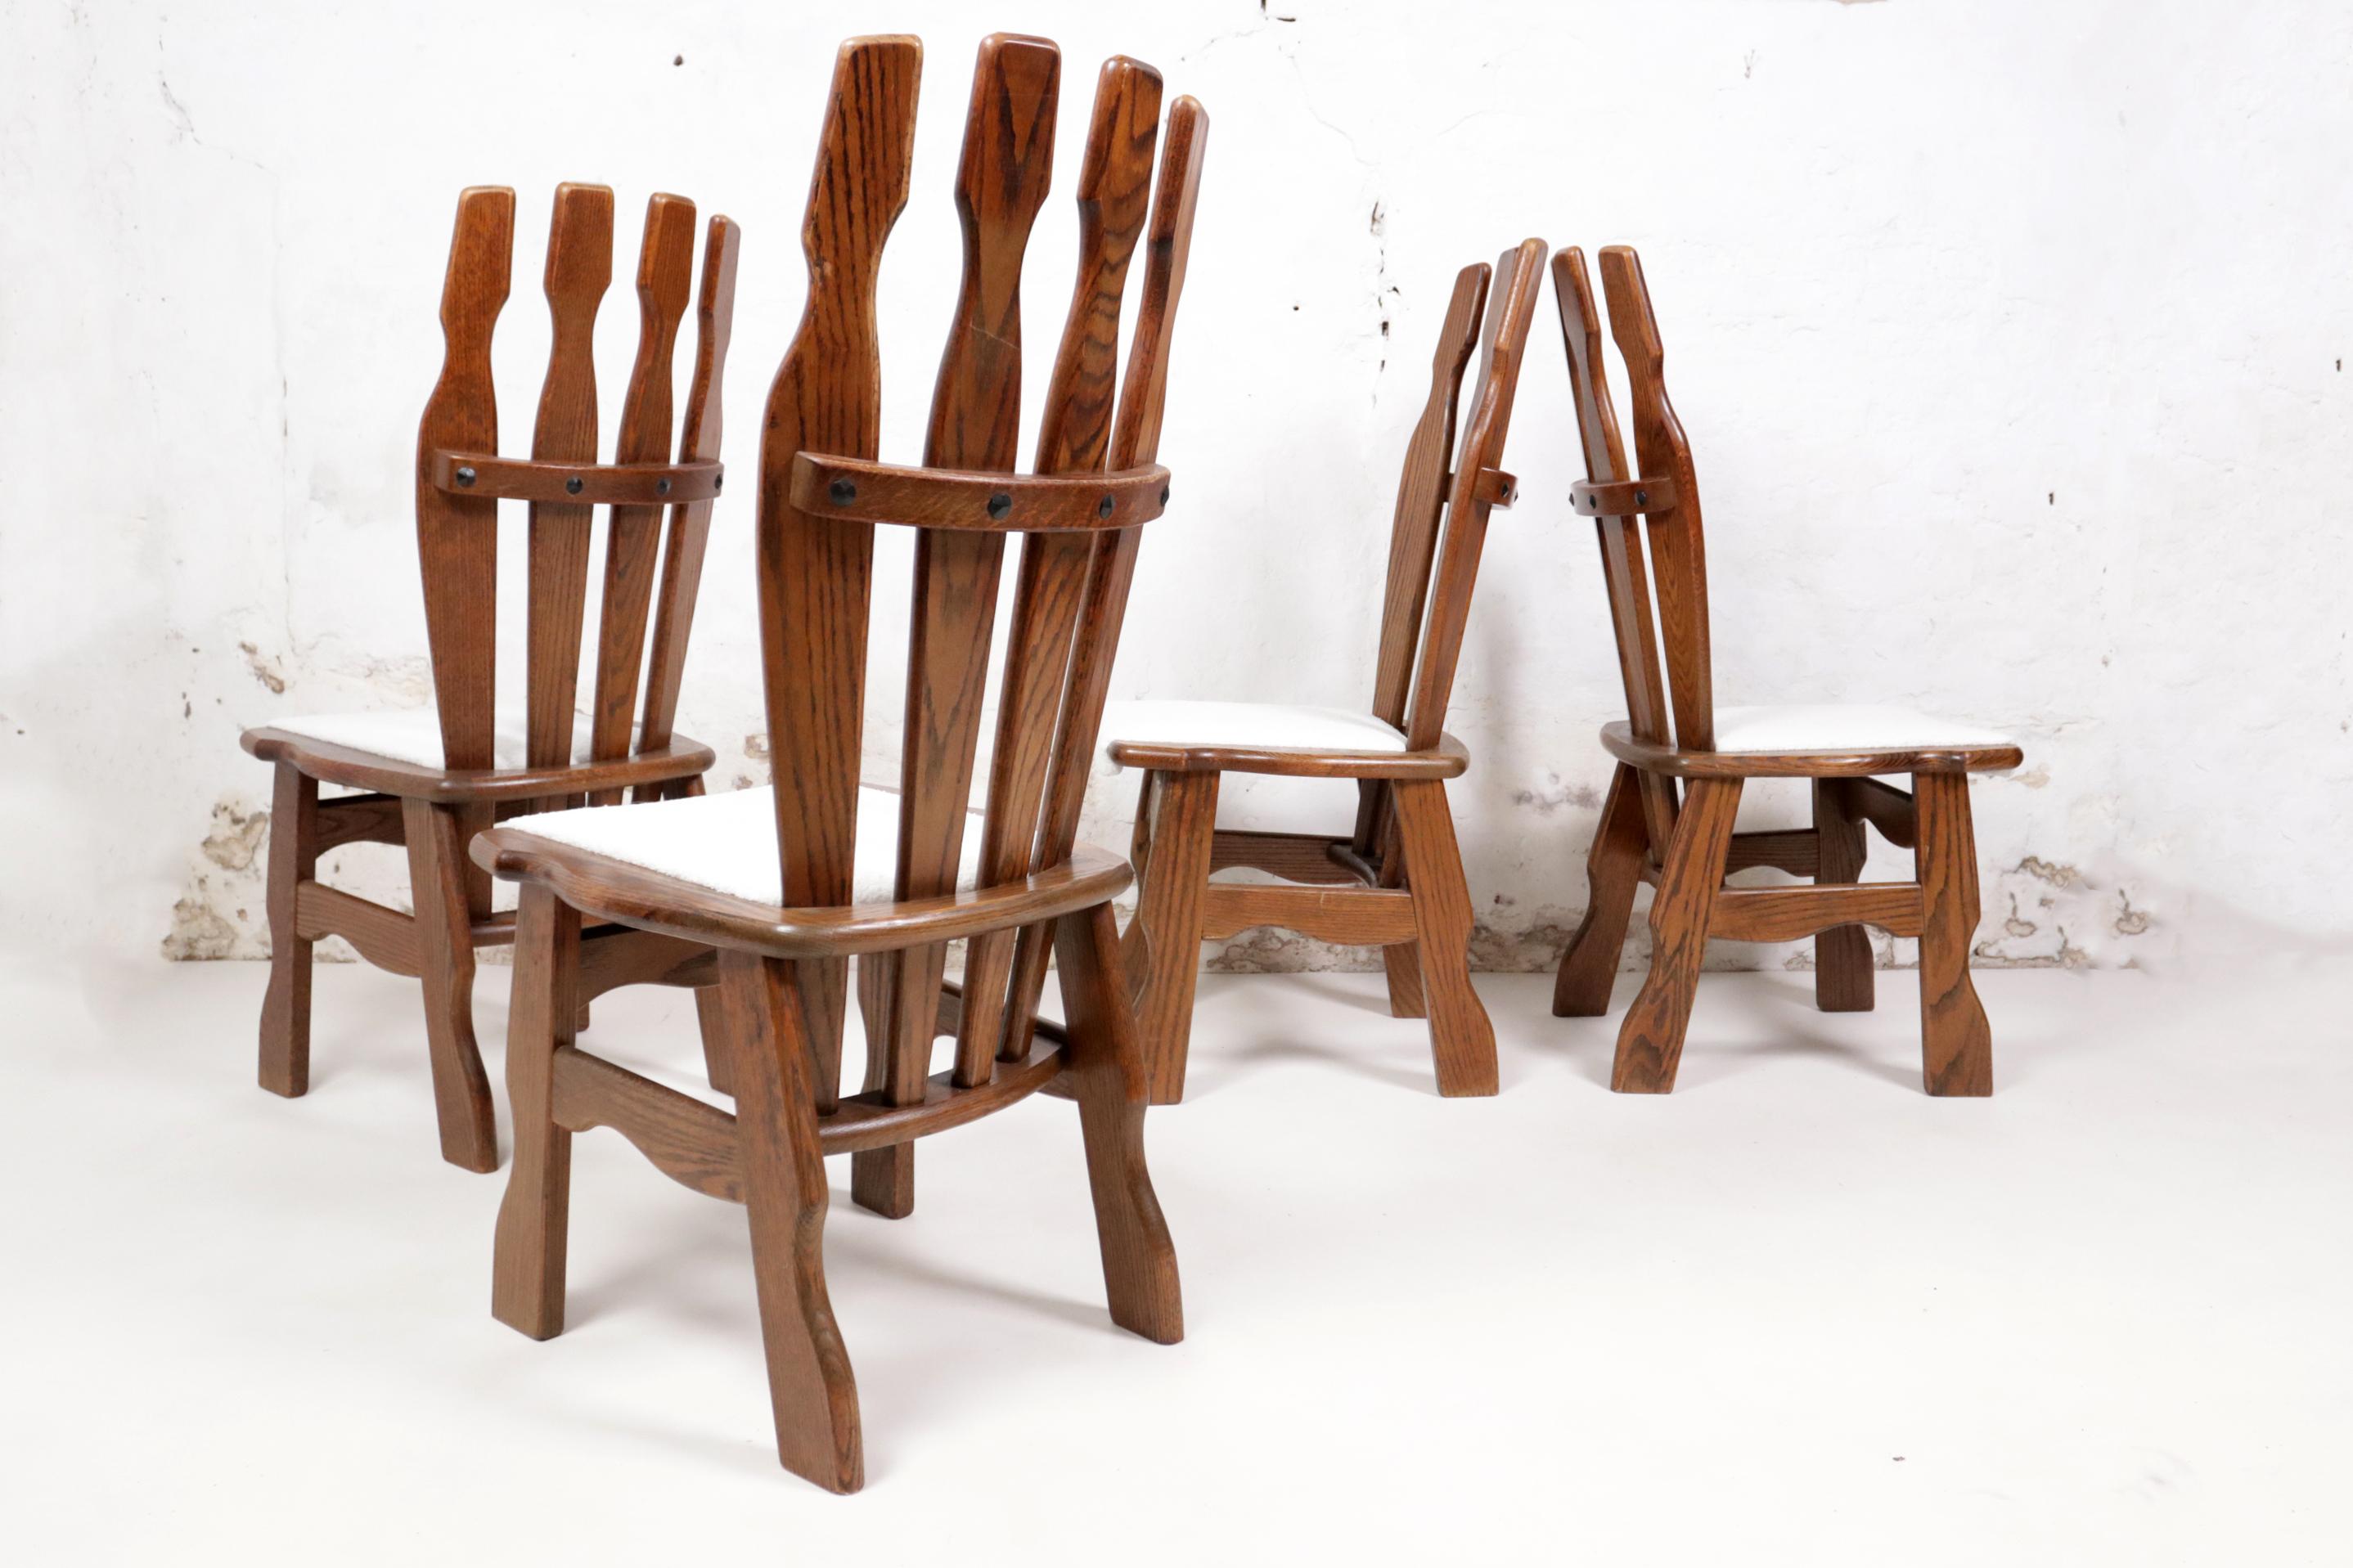 Set of 4 Brutalist Mid-Century Oak Dining Room Chairs, 70's For Sale 5